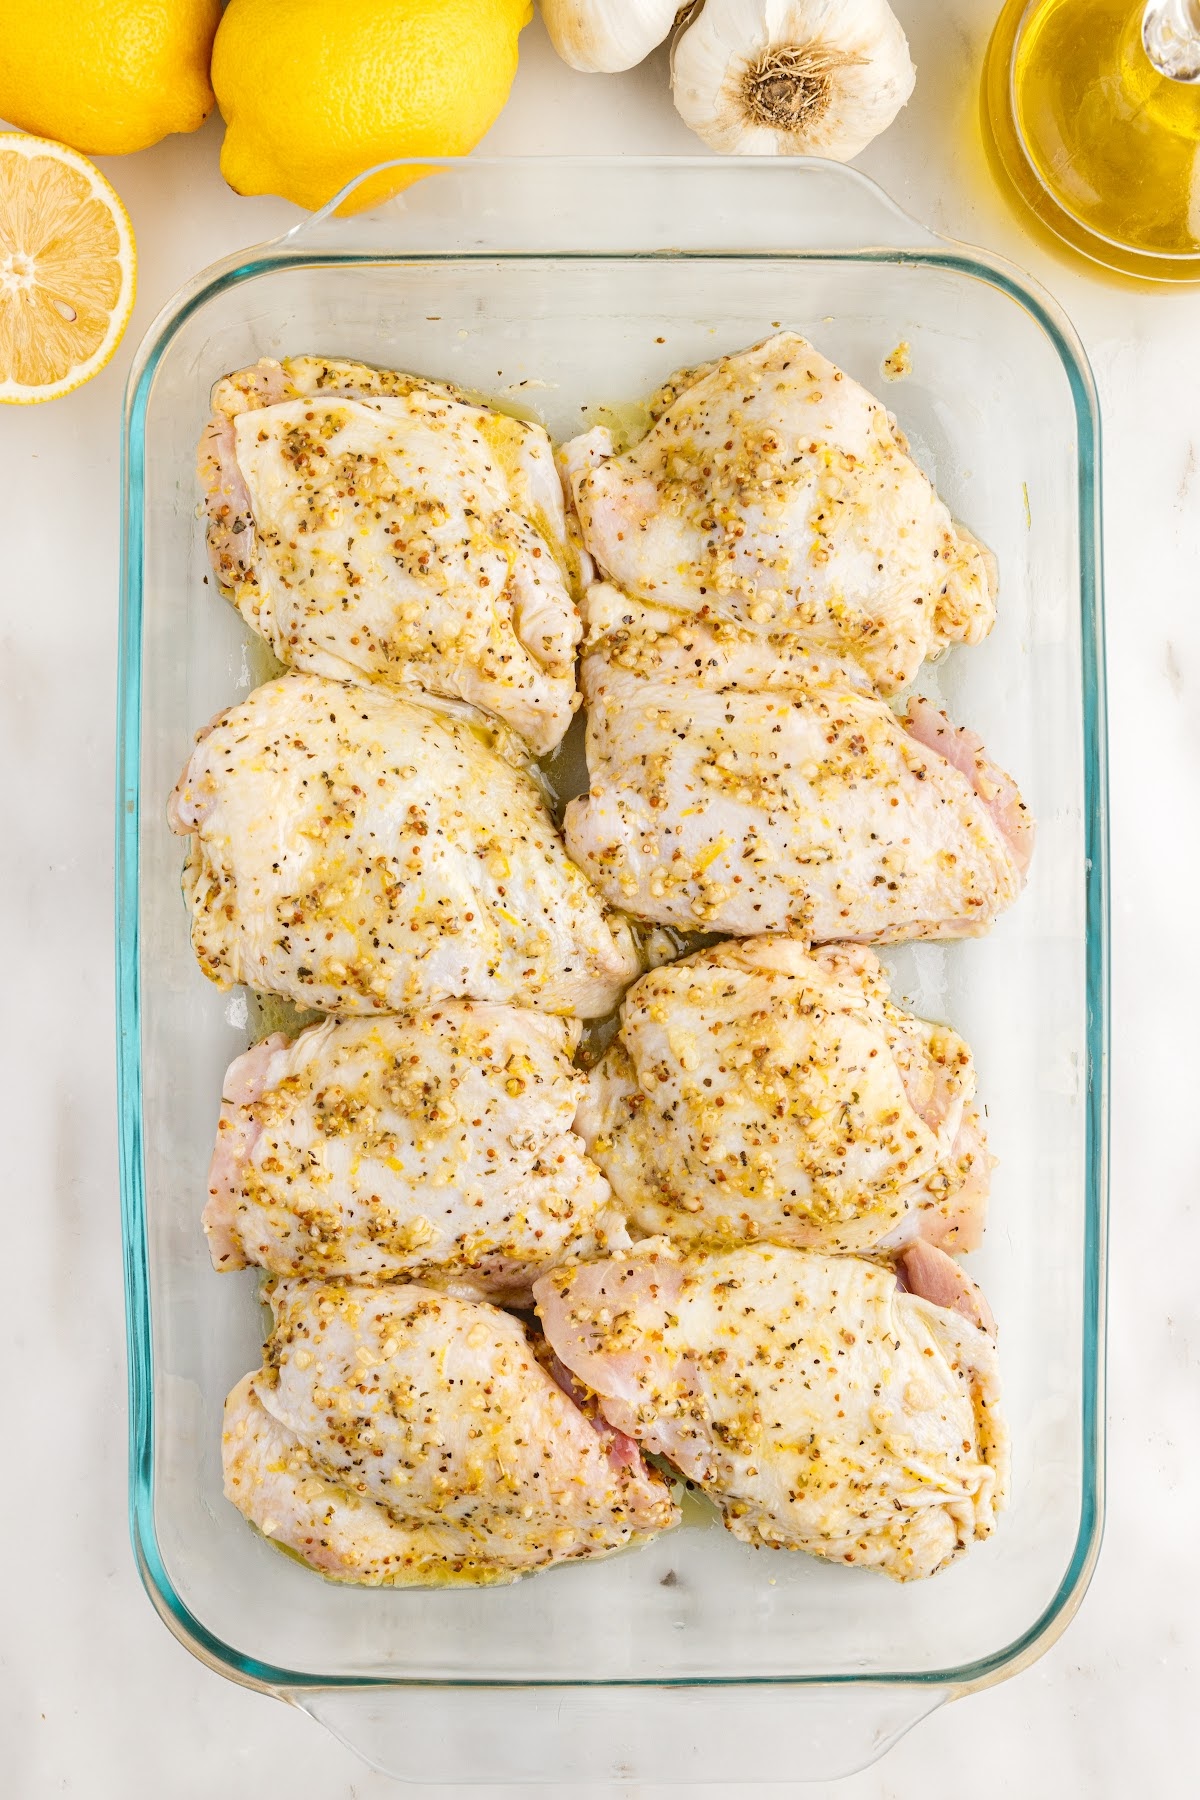 Baked Chicken Thighs in a 9x13 before baking.